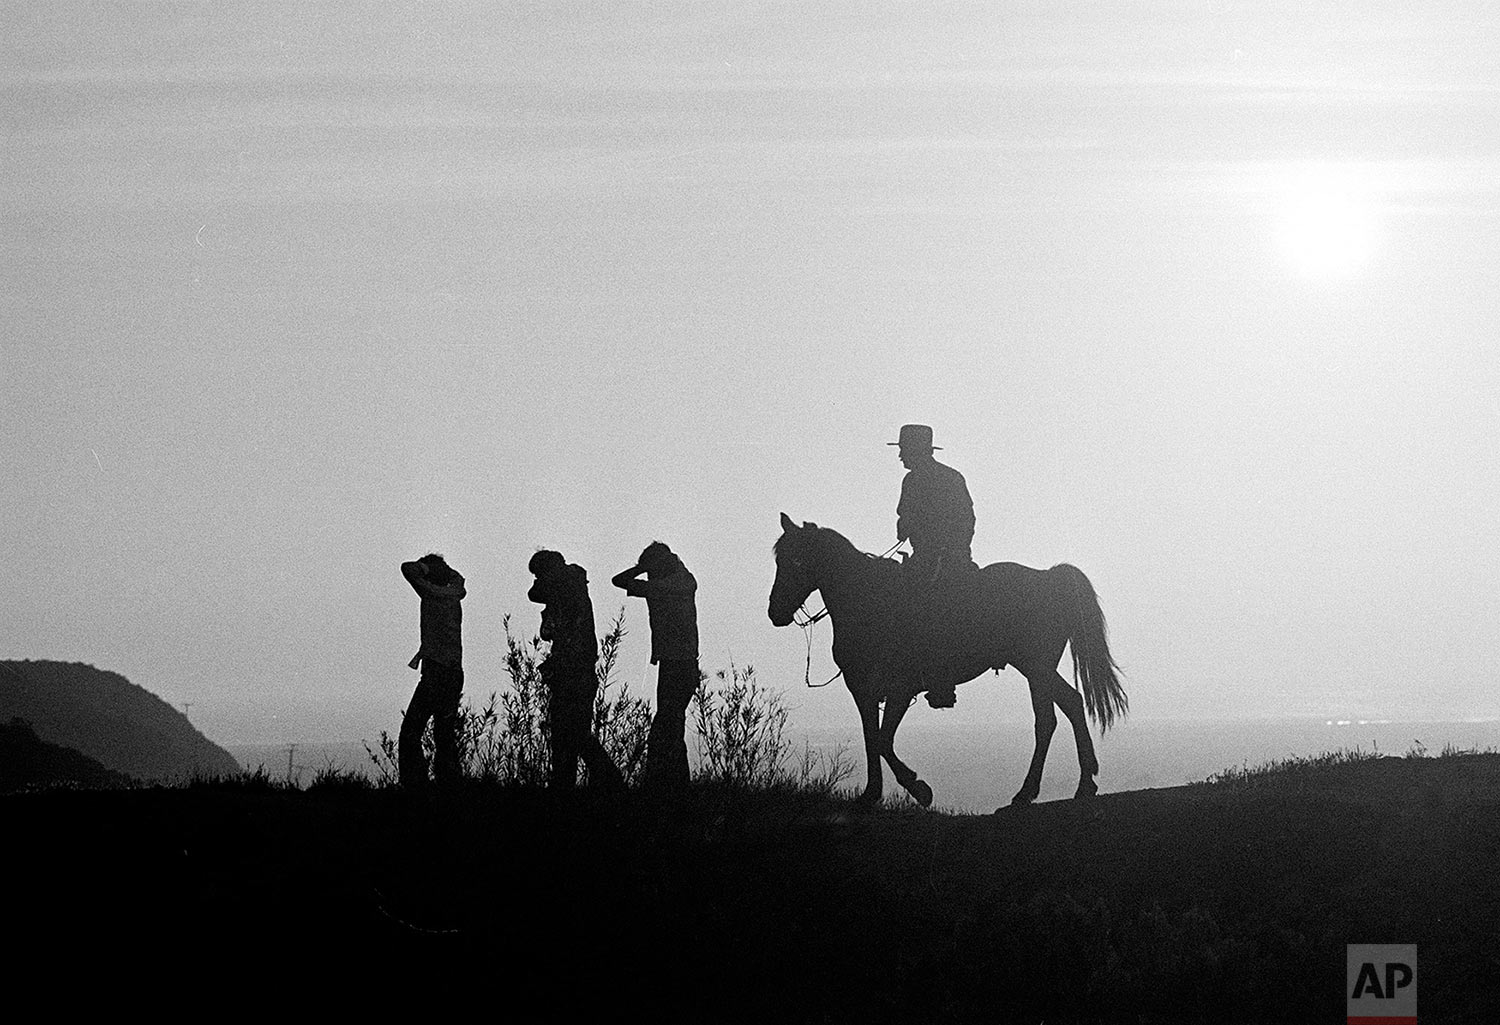  In this Aug. 18, 1981, photo taken by Associated Press photographer Lennox McLendon, shows U.S. Border Patrol officer Ed Pyeatt, on horseback, leading a group of immigrants who crossed the border without legal permission, down the hillside toward wa